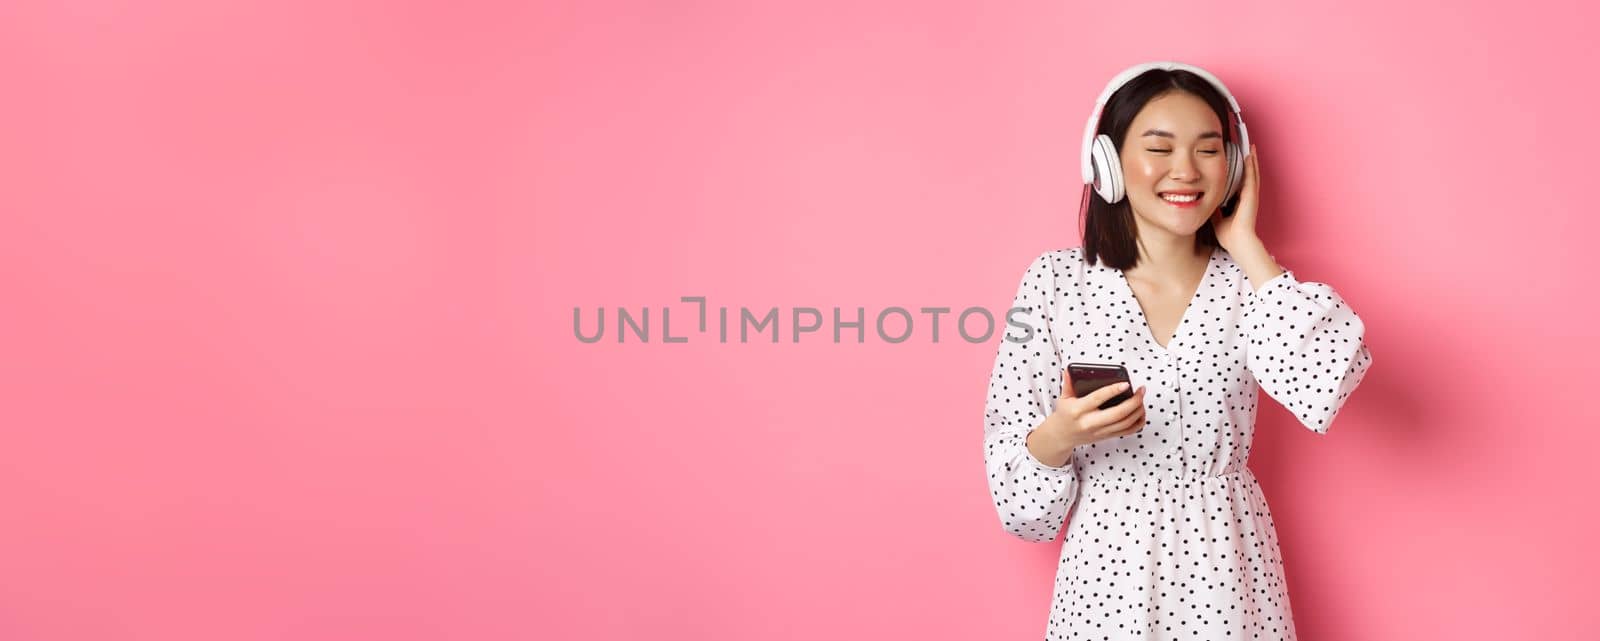 Romantic asian girl listening music in headphones, smiling with closed eyes, holding mobile phone, standing over pink background.